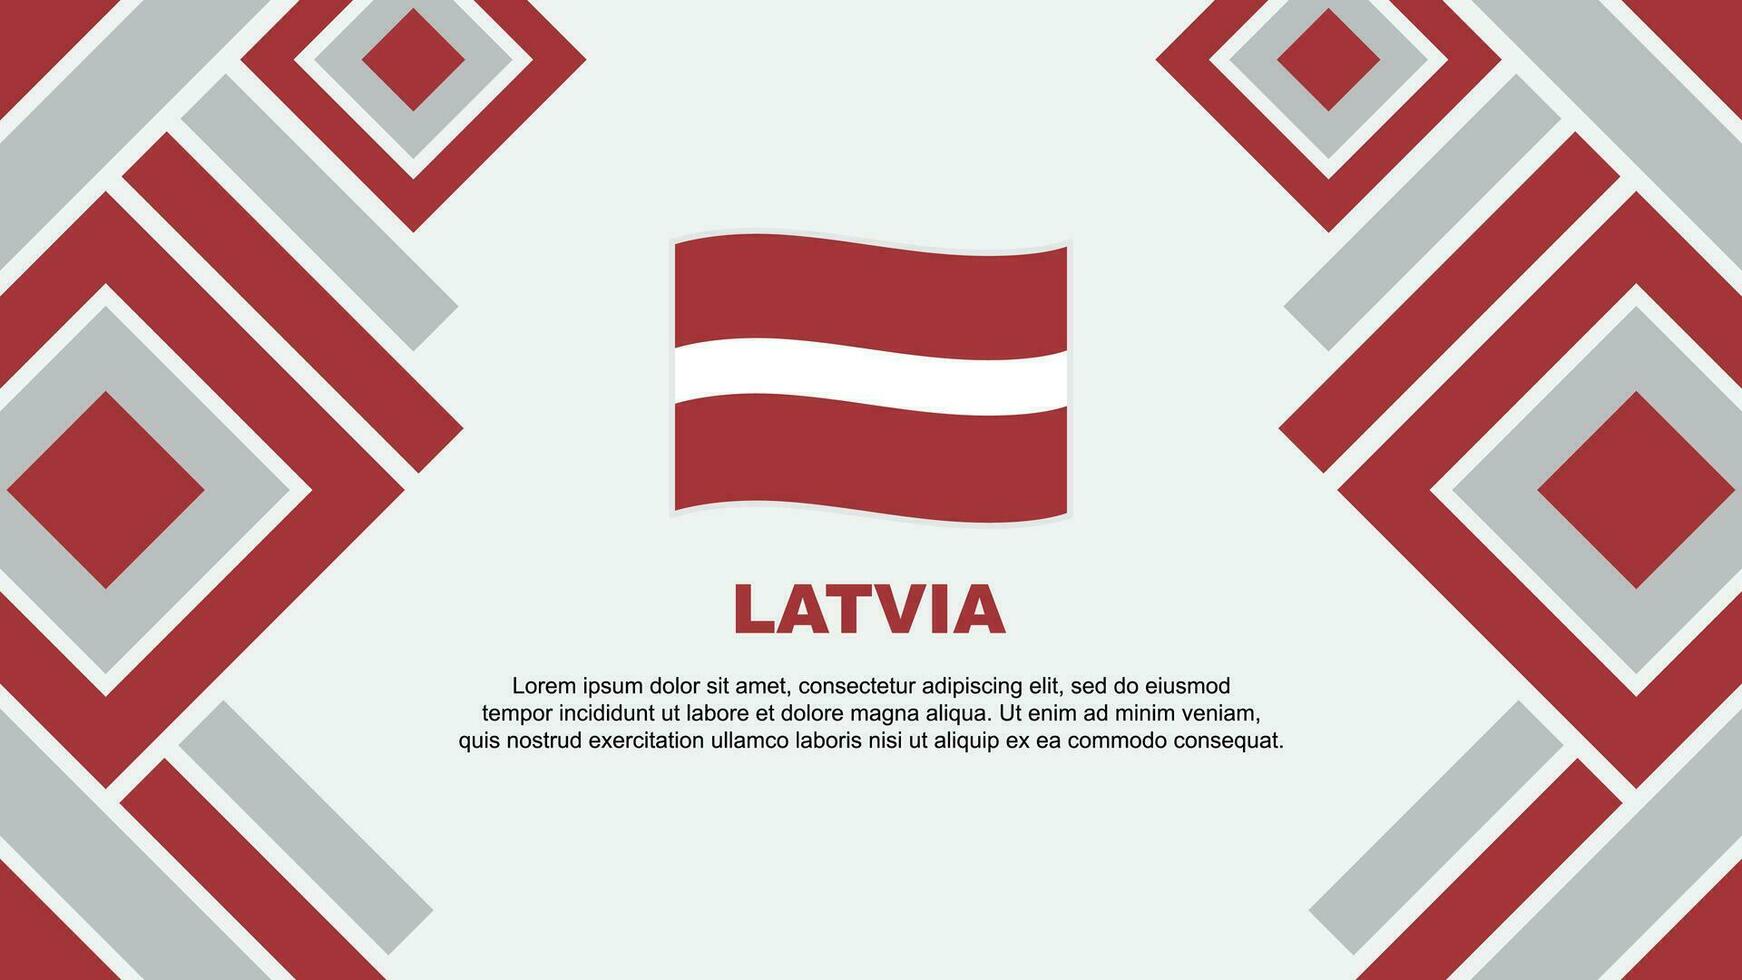 Latvia Flag Abstract Background Design Template. Latvia Independence Day Banner Wallpaper Vector Illustration. Latvia